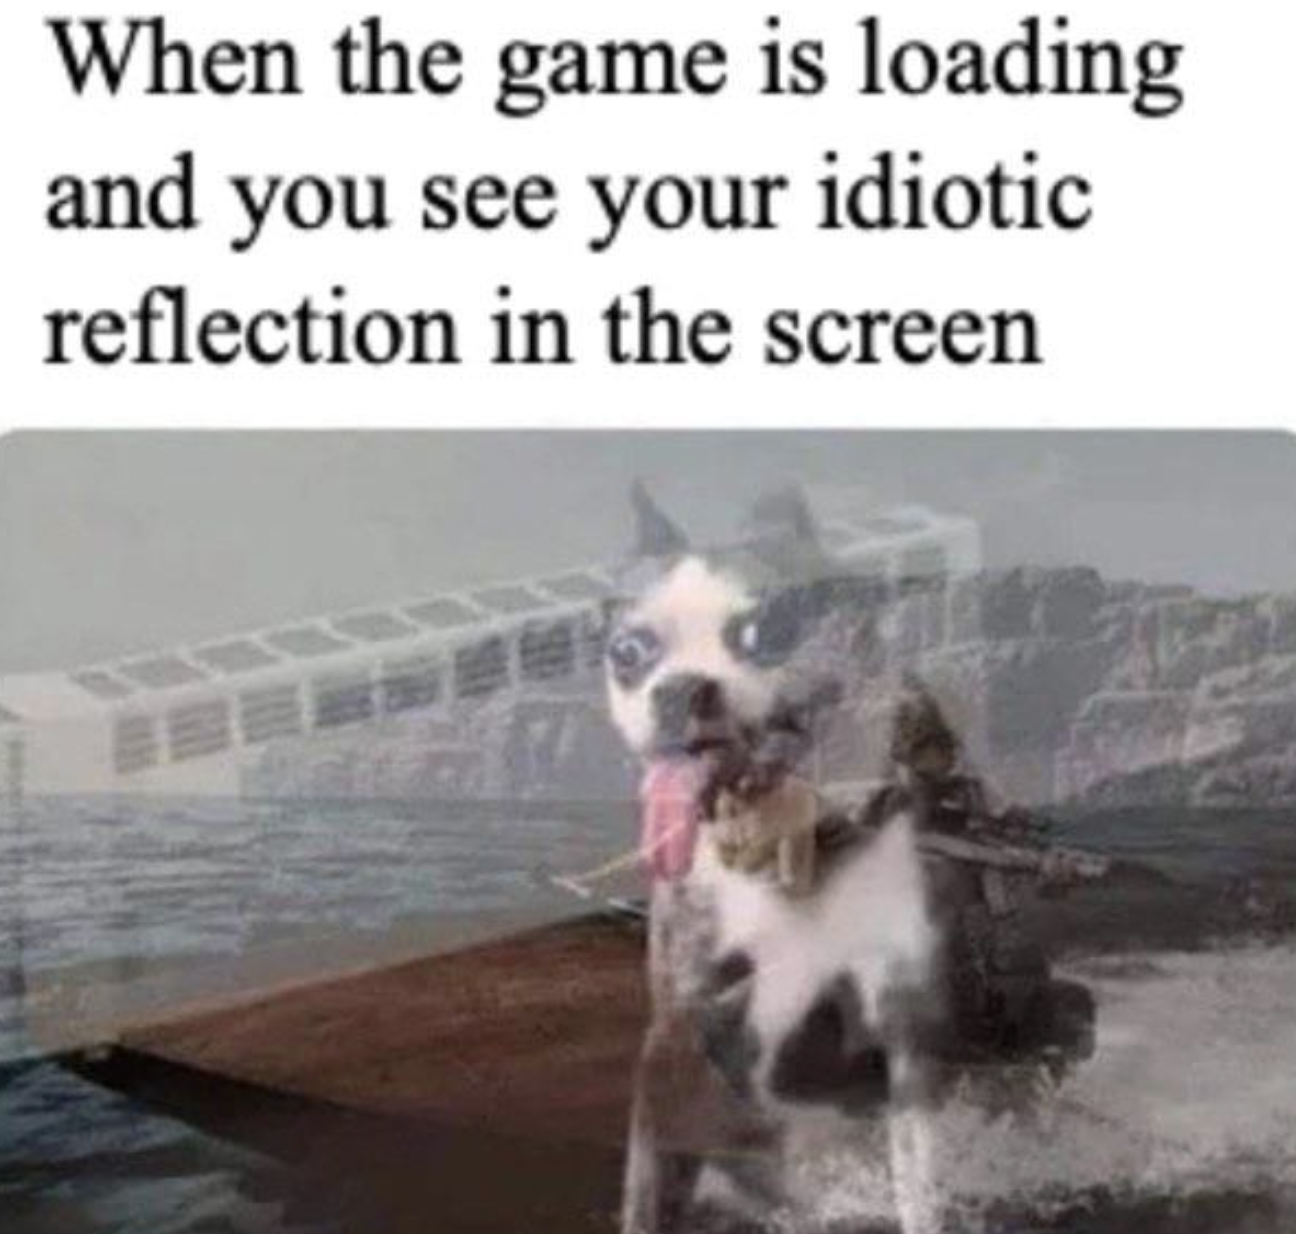 Gaming memes - loading screen dog reflection - When the game is loading and you see your idiotic reflection in the screen